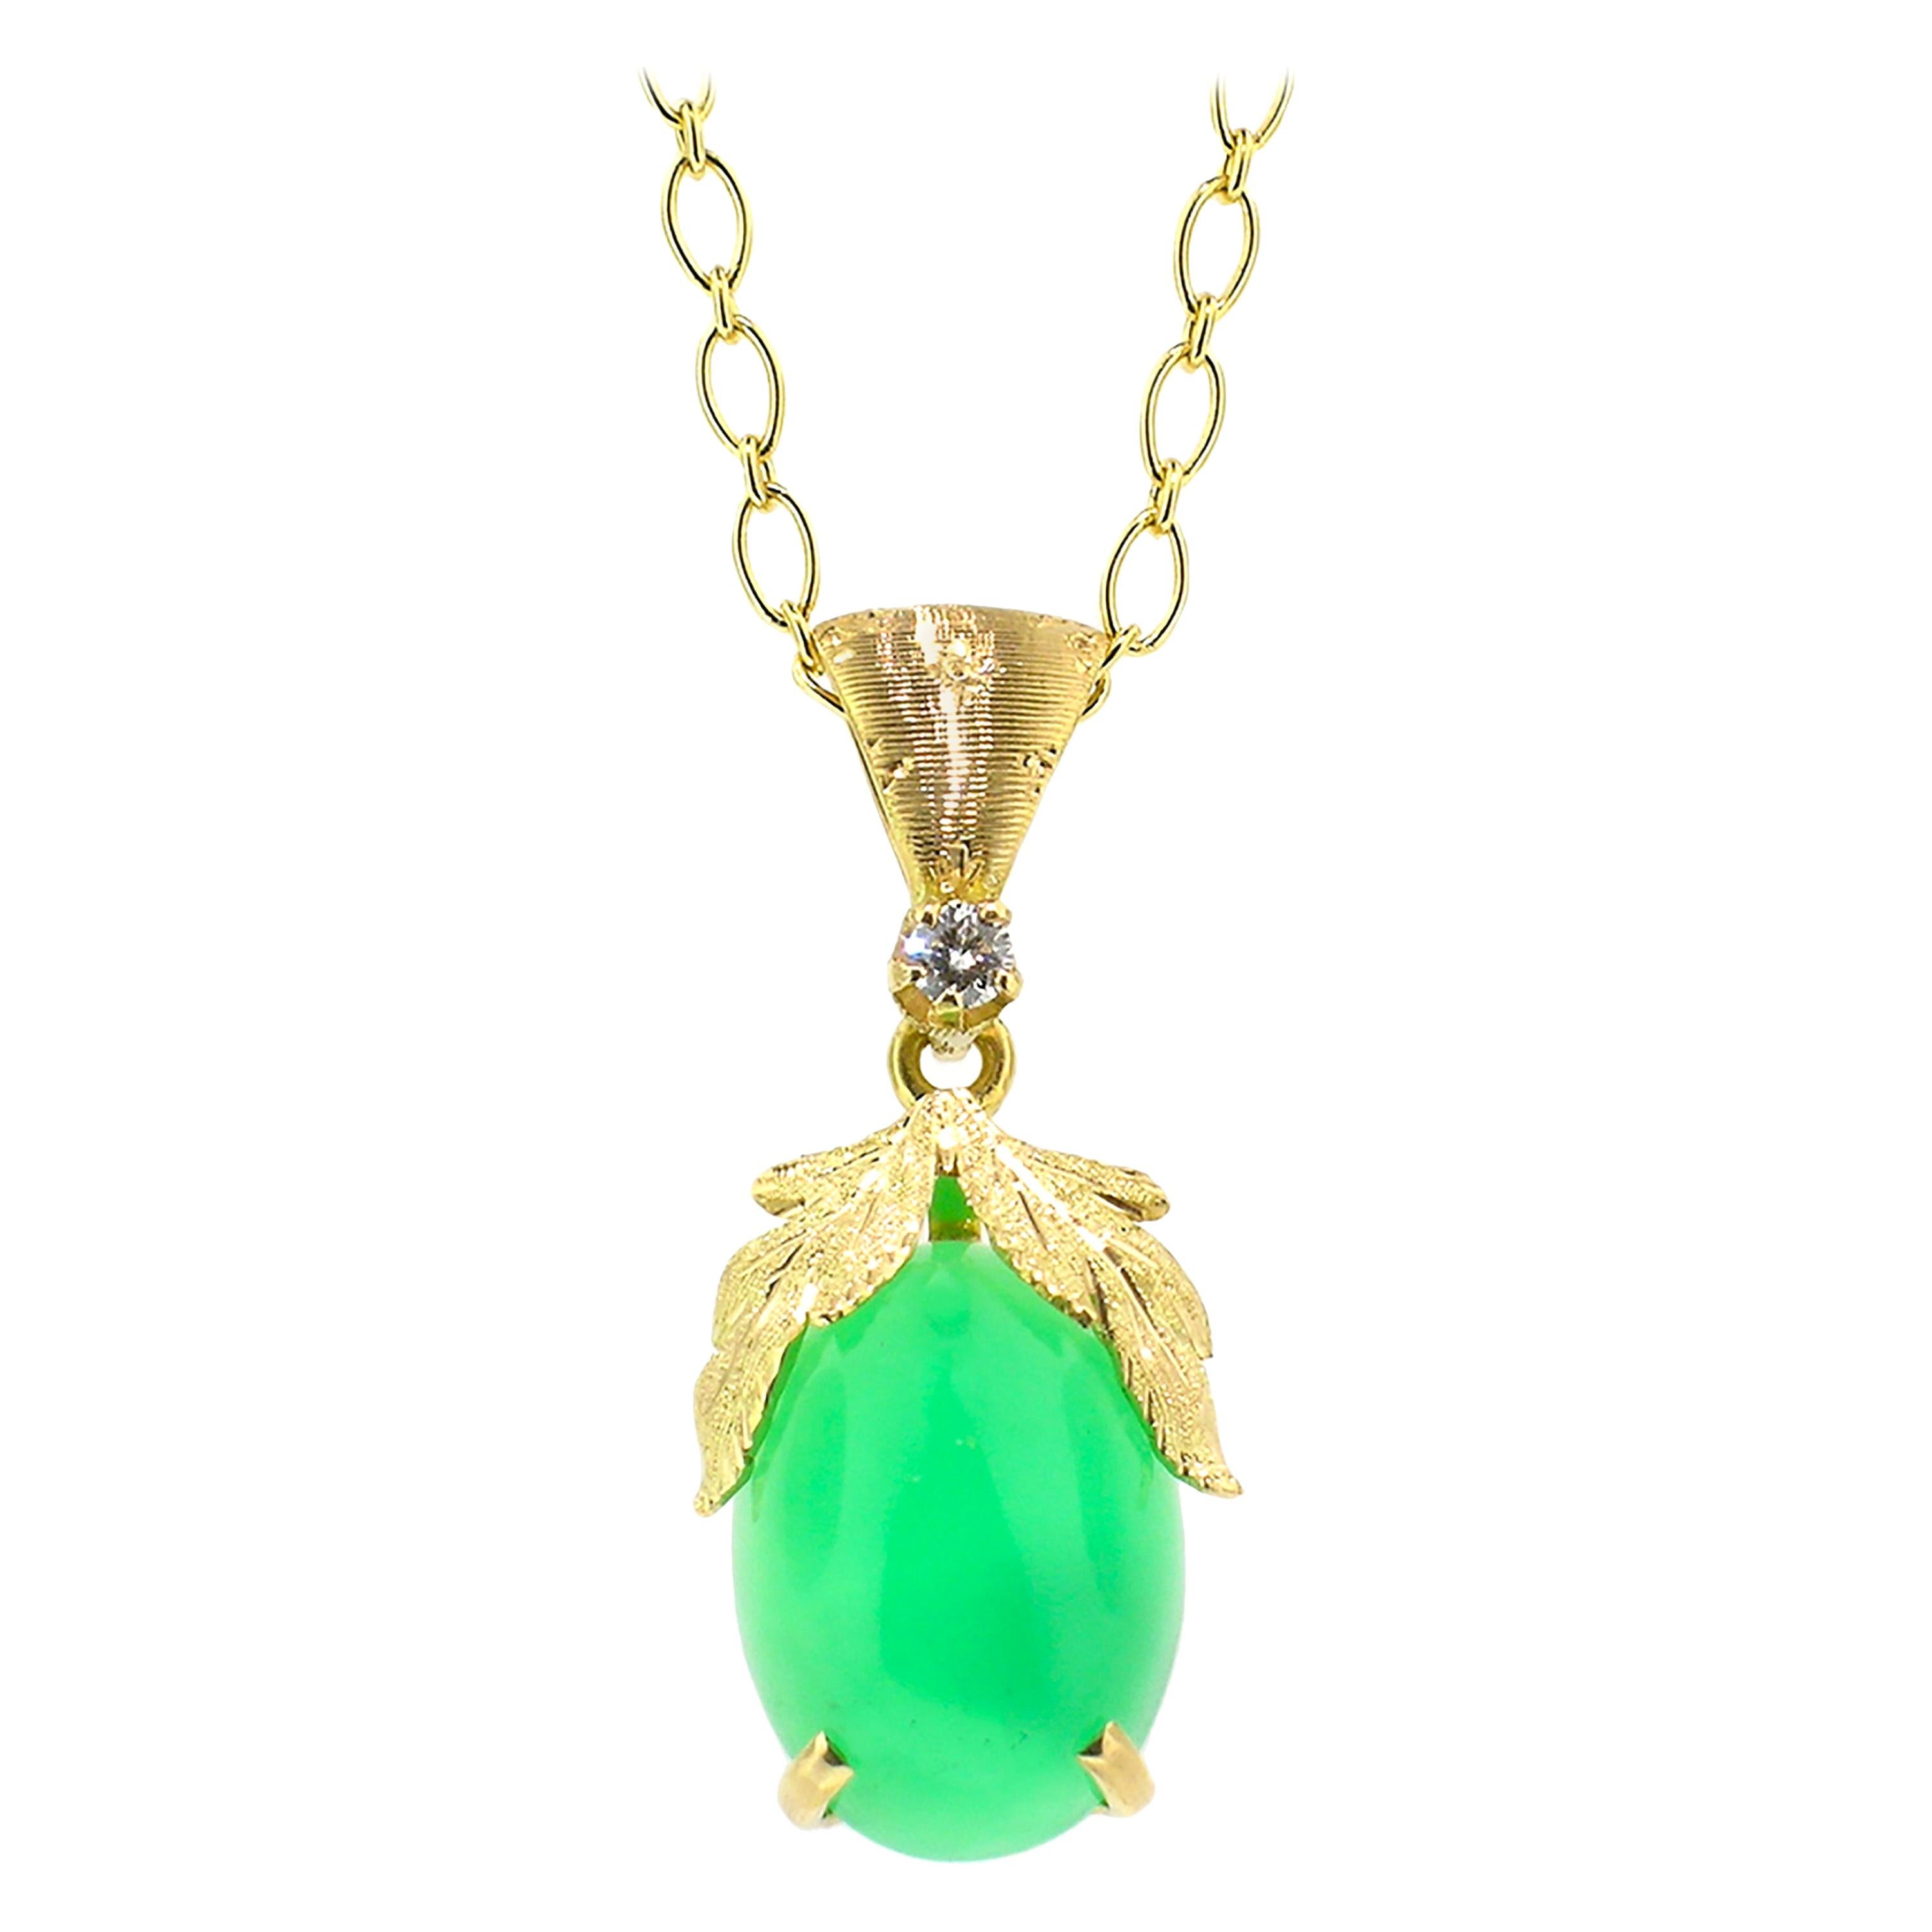 6.98ct Chrysoprase and 18kt Necklace, Made in Italy by Cynthia Scott Jewelry